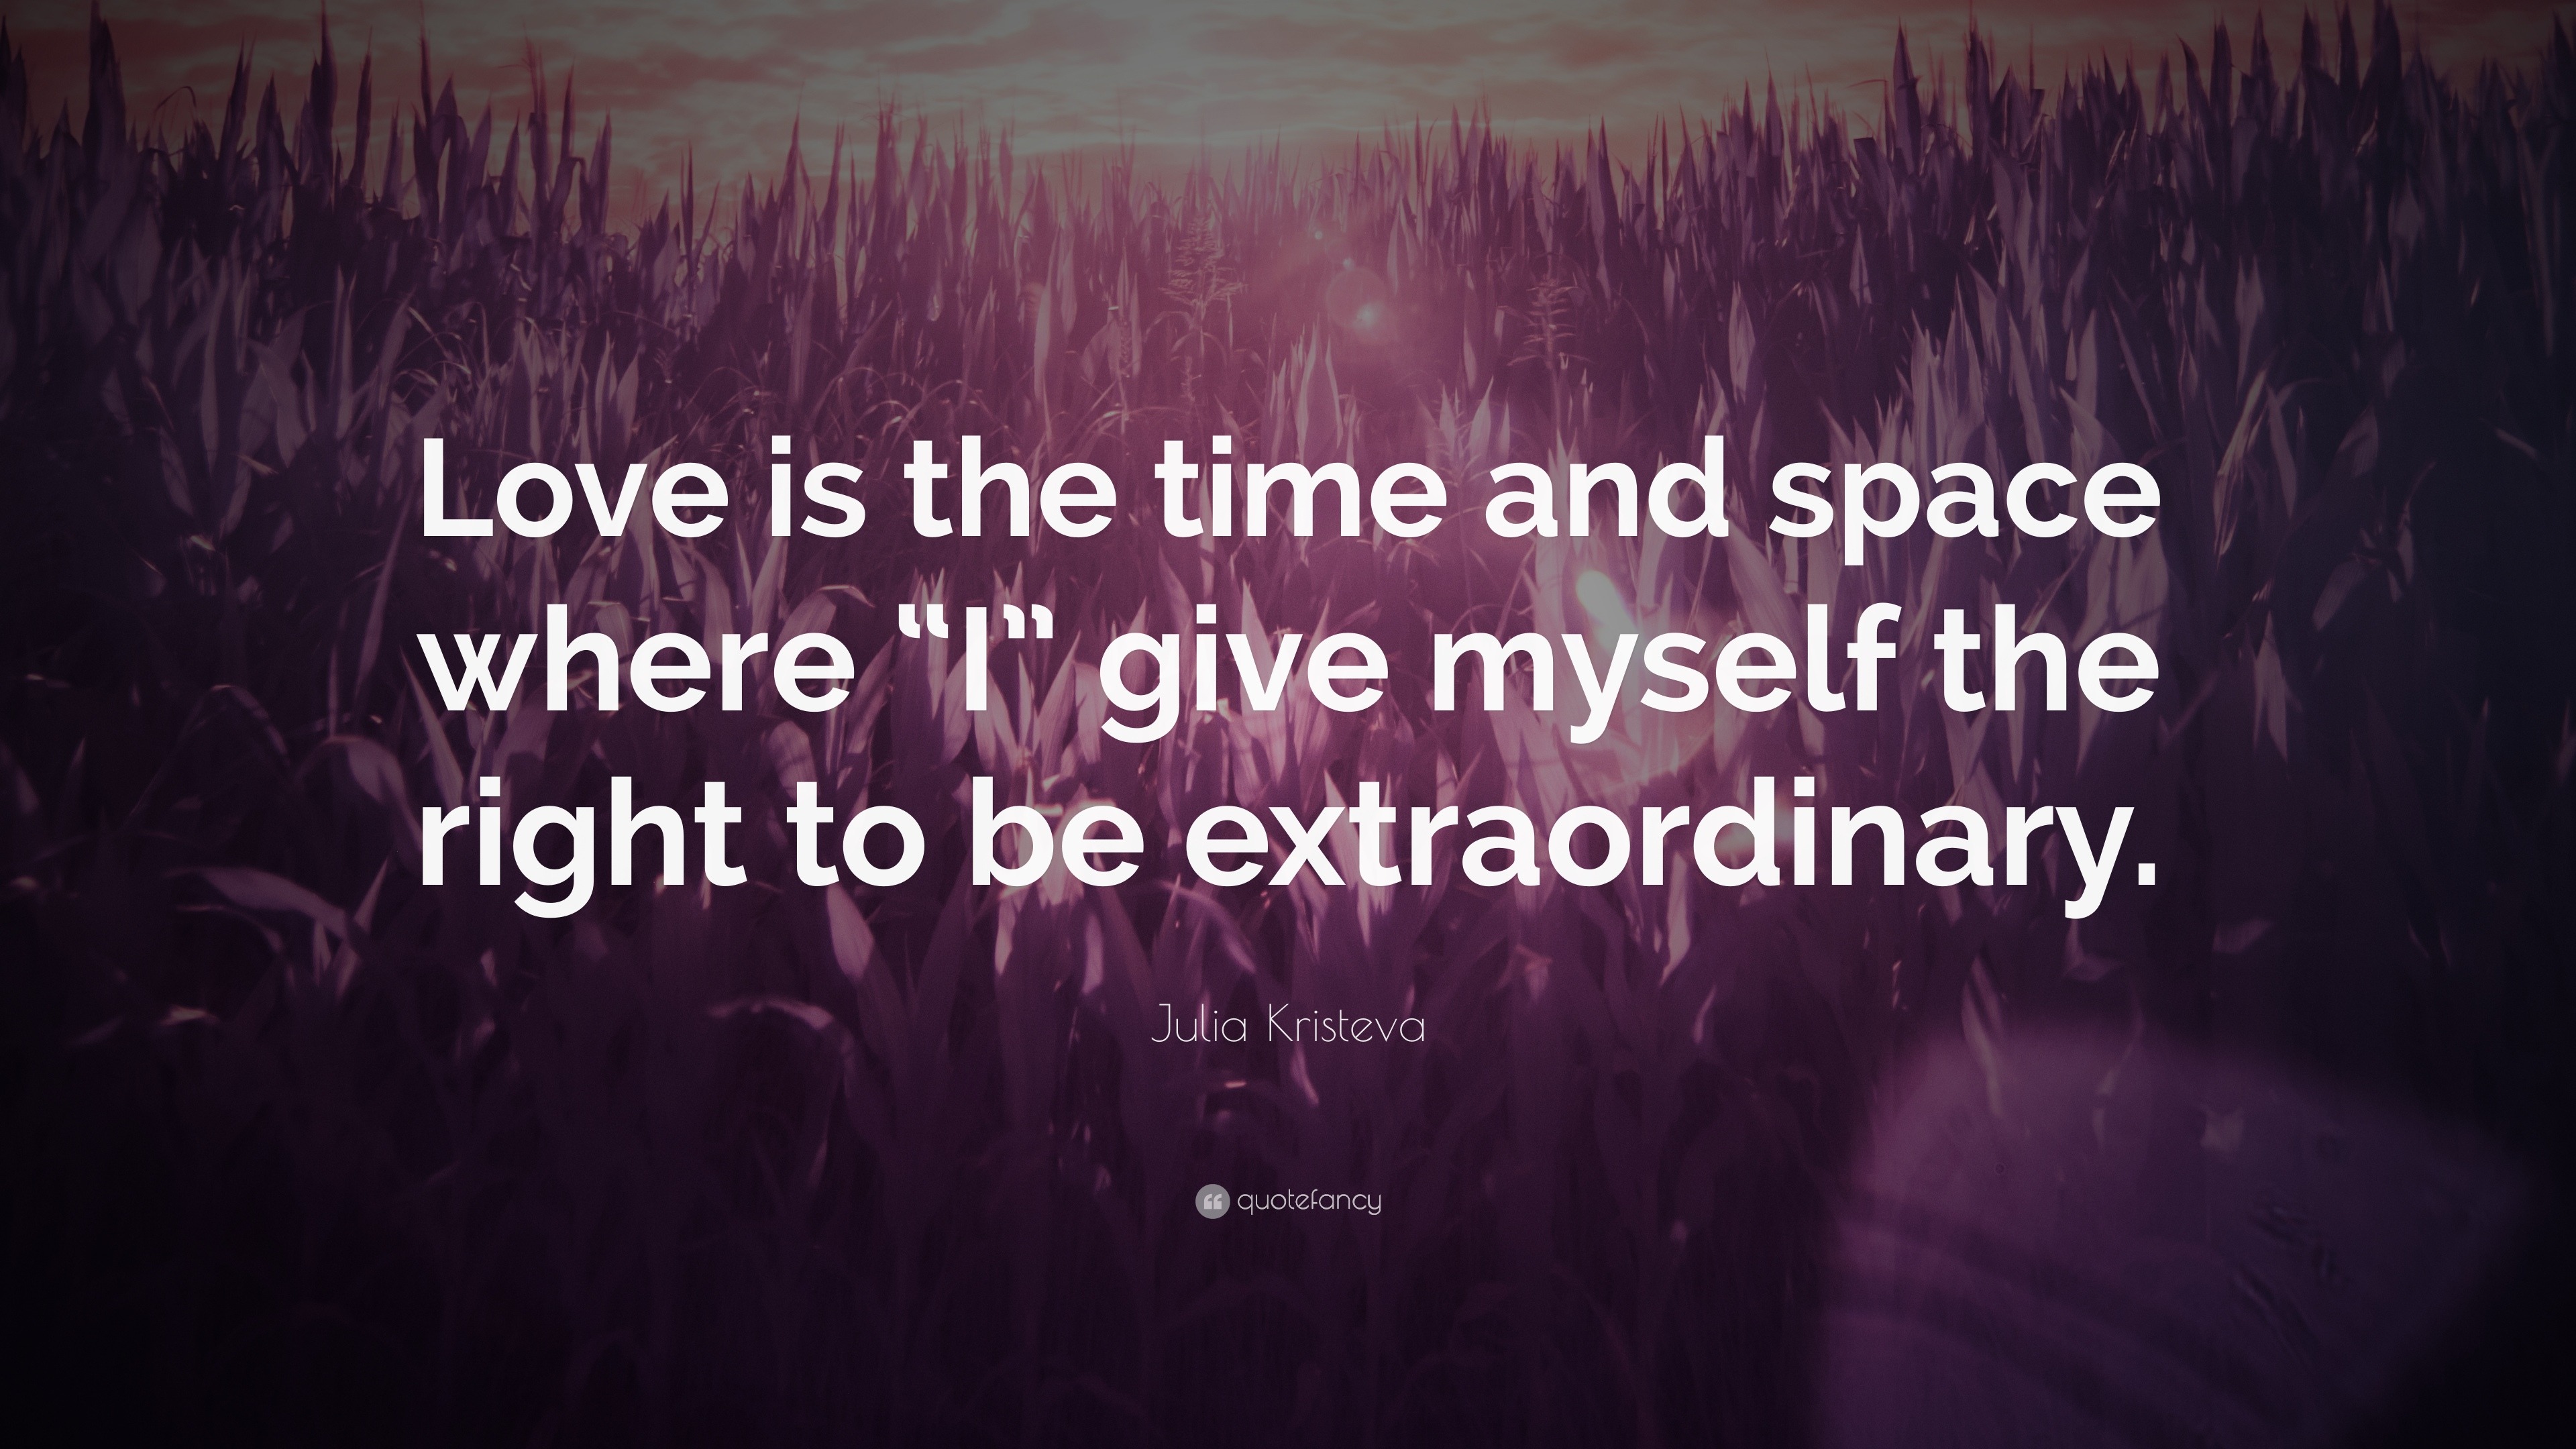 Julia Kristeva Quote “Love is the time and space where “I” give